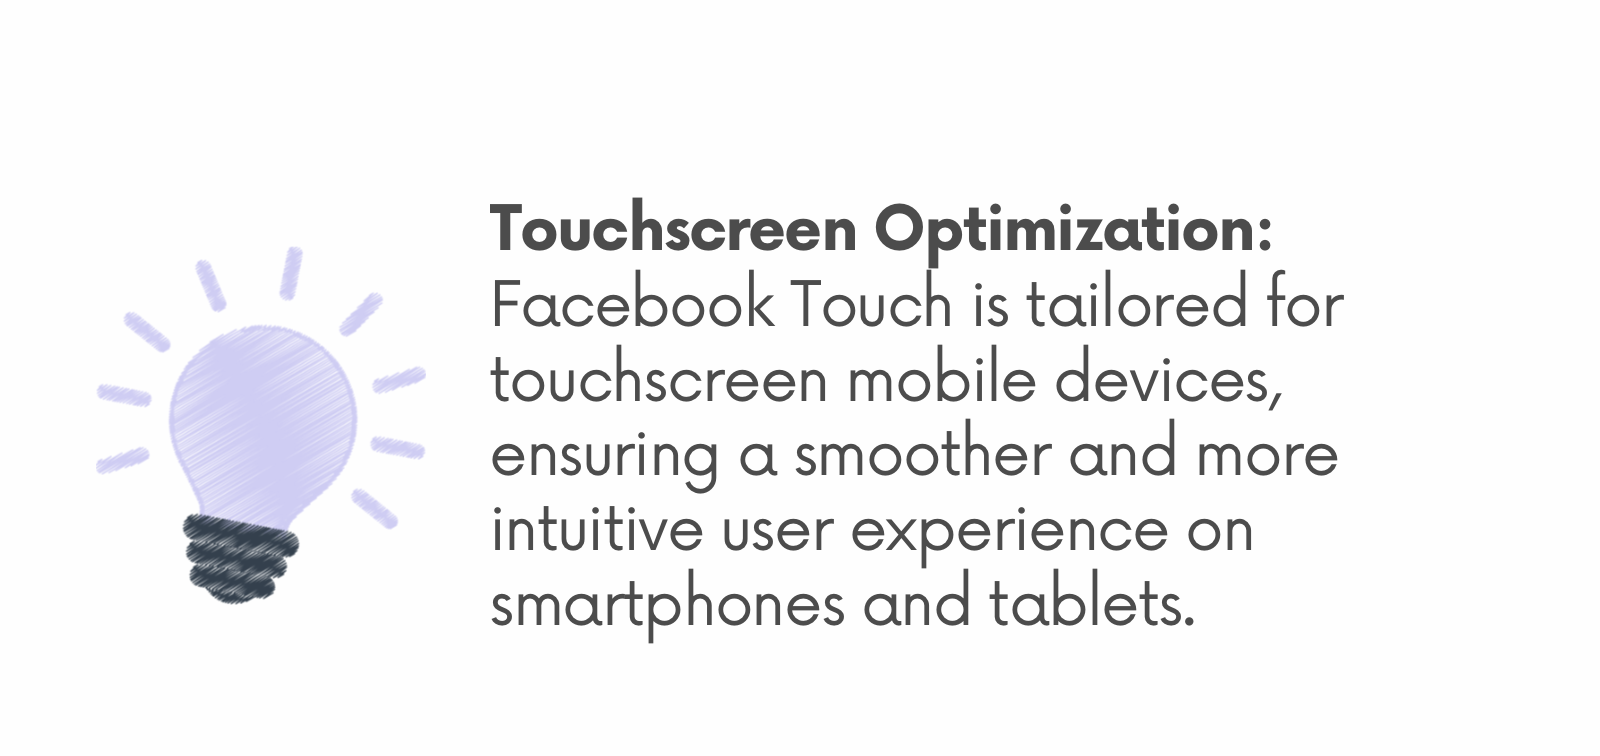 What are the Features of Facebook Touch?